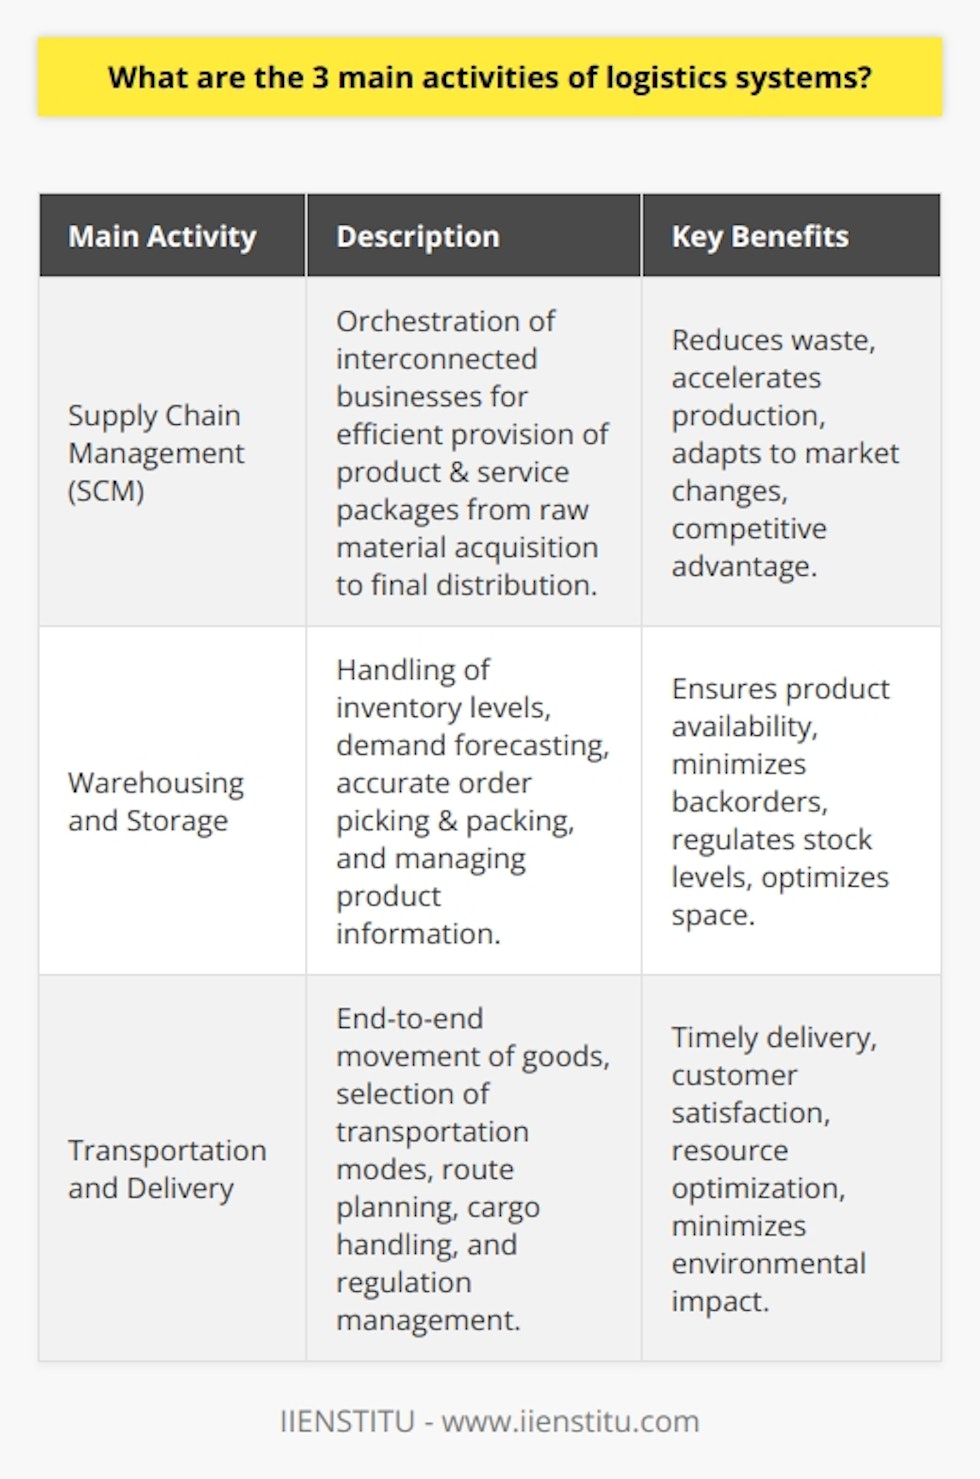 In the complex ecosystem of global commerce, logistics systems serve as the backbone that allows businesses to transport goods from suppliers to customers seamlessly. These systems include a variety of interlinked components, but three main activities stand at the core: Supply Chain Management, Warehousing and Storage, and Transportation and Delivery.Supply Chain Management (SCM)At its essence, SCM involves the orchestration of a network of interconnected businesses involved in the ultimate provision of product and service packages required by end-users. This seamless coordination ensures that from raw material acquisition to final product distribution, every step is synchronized to maintain the flow of goods, data, and finances efficiently. SCM reduces waste, speeds up production cycles, and responds agilely to market or demand changes, thus creating a competitive advantage for businesses.Warehousing and StorageHere, logistics systems emphasize the critical importance of handling inventory - both incoming (raw materials) and outgoing (finished goods). Effective warehousing is much more than just storing products; it encompasses forecasting demand, controlling stock levels, picking and packing orders accurately, and managing information regarding the whereabouts and status of products. Optimized warehousing processes ensure that goods are available at the right time, and the right place, and in the condition needed for consumption, thereby reducing the likelihood of costly backorders or excess stock.Transportation and DeliveryThis activity covers the end-to-end movement of goods and is often the most visible aspect of logistics systems. Transportation strategy involves meticulously choosing the right mix of modes (road, rail, air, sea), considering cost, speed, reliability, and the environmental impact of each option. The process includes route planning, cargo handling, and the management of logistics partners and regulations. Effective transportation means delivering the right goods, in the right quantity, to the right place, at the right time — crucial for building customer satisfaction and loyalty.For individuals and organizations interested in fine-tuning their skills in these critical logistical Areas, IIENSTITU offers programs and resources specifically tailored to provide deeper knowledge and practical tools to navigate the complexities of logistics systems. Mastery in these three core activities can lead to enhanced organizational efficiency, better customer service, and ultimately, improved profitability.